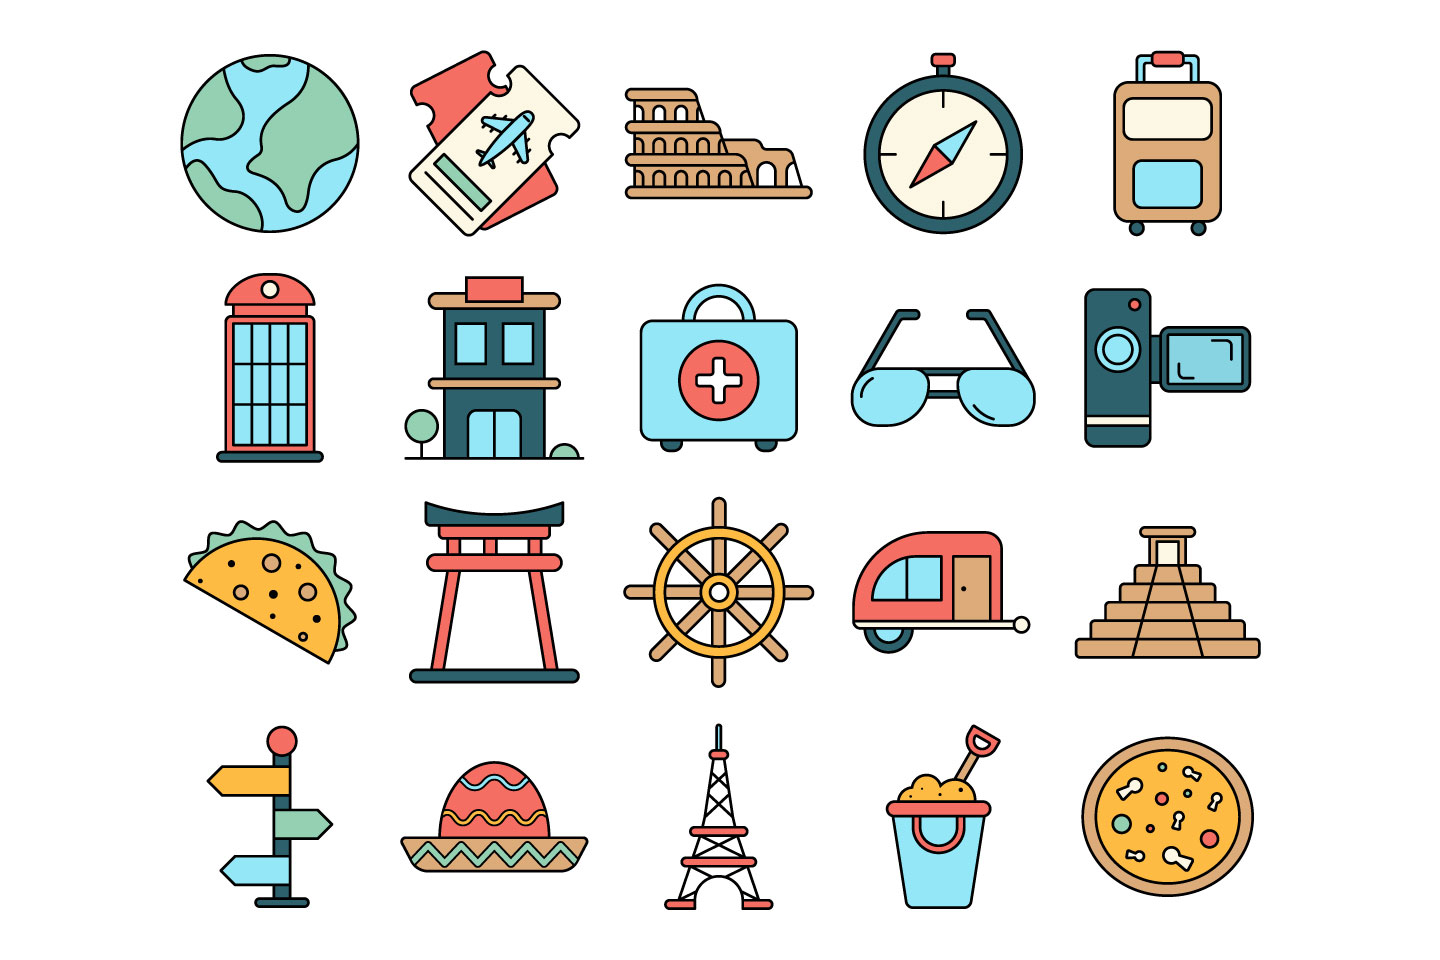 travel icon download free